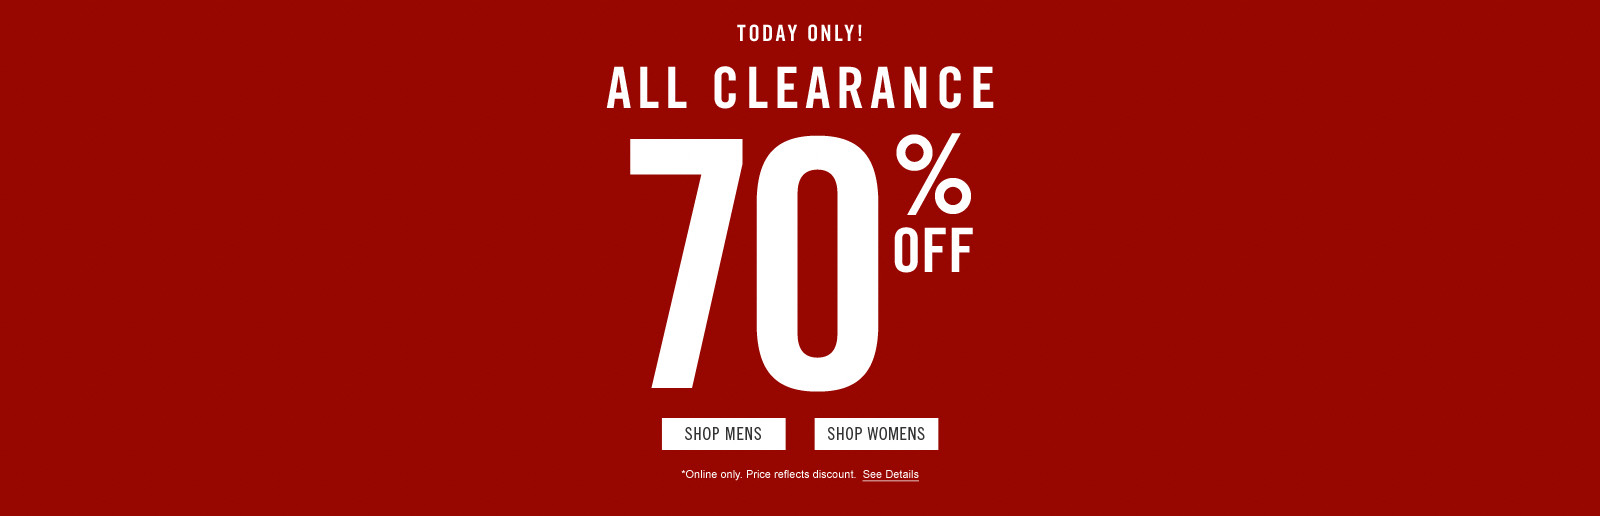 all clearance abercrombie